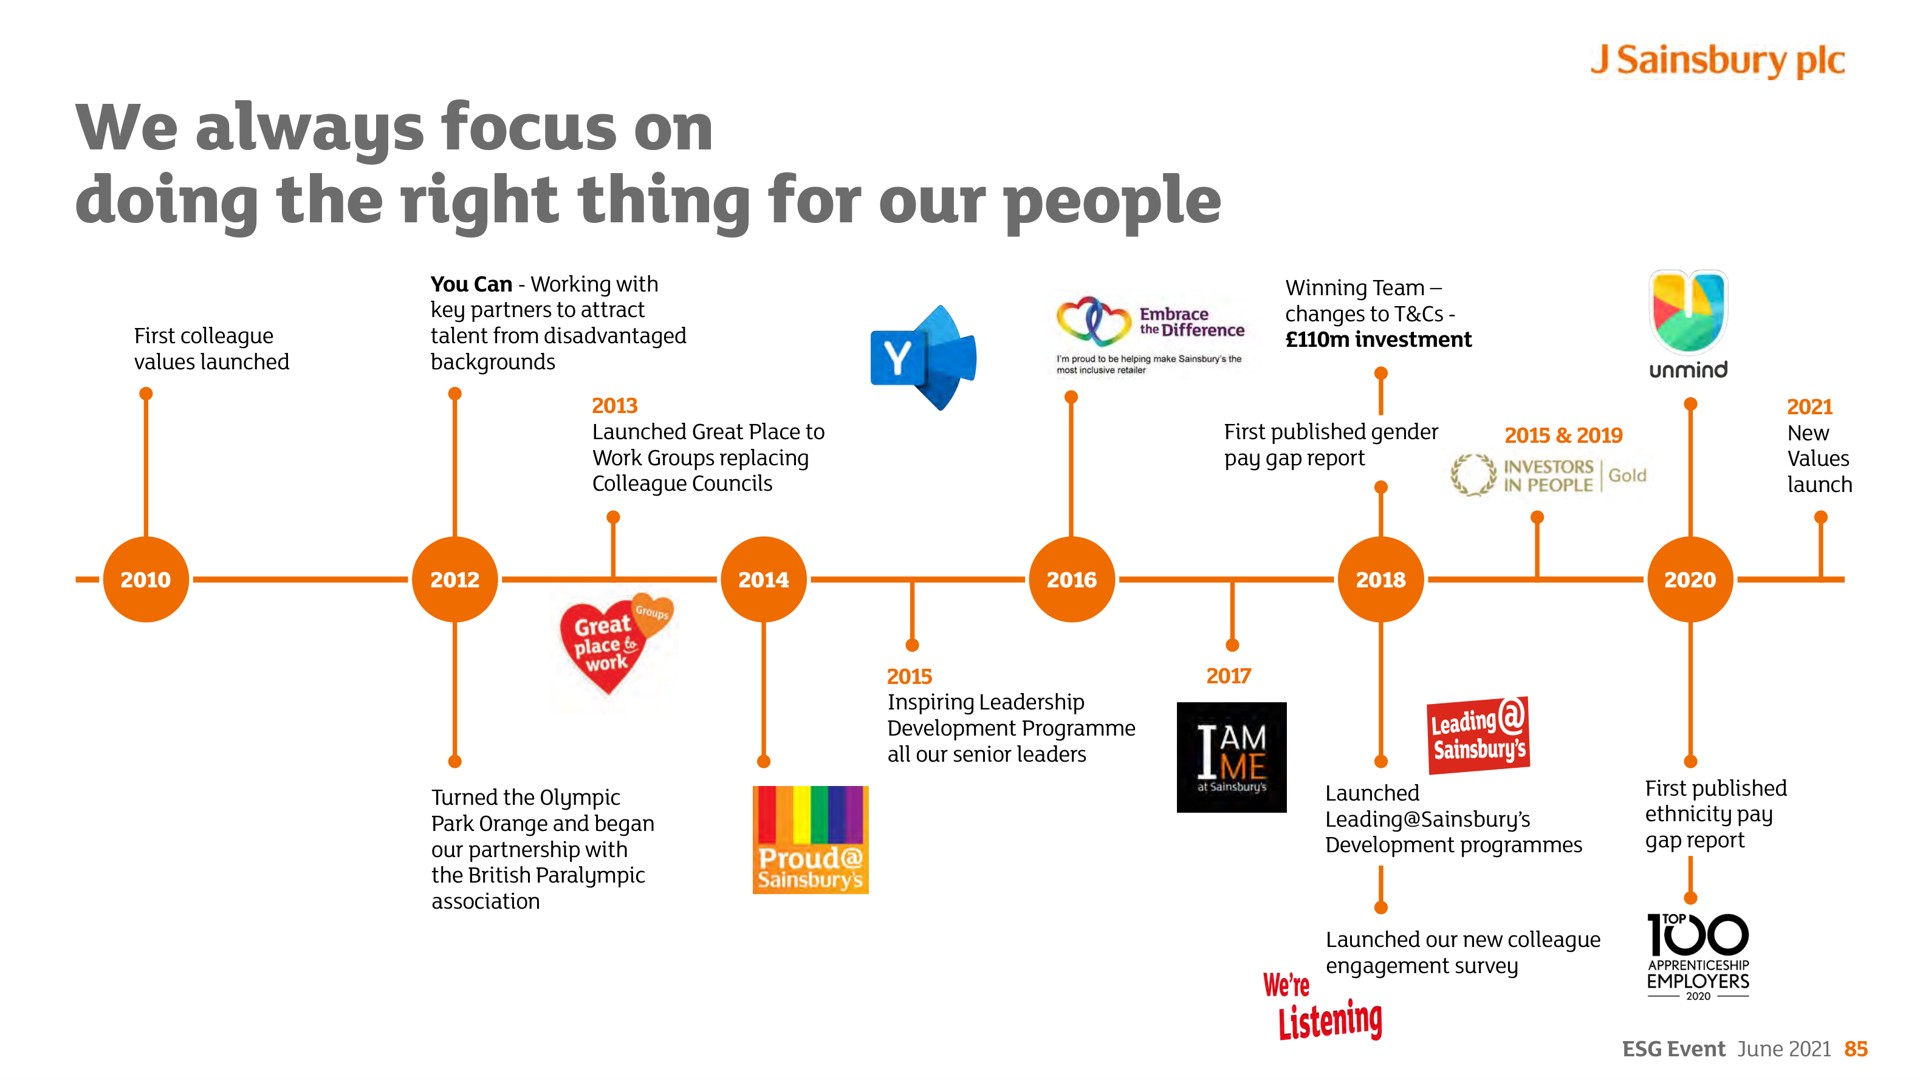 we always focus on doing the right thing for our people | Sainsbury's